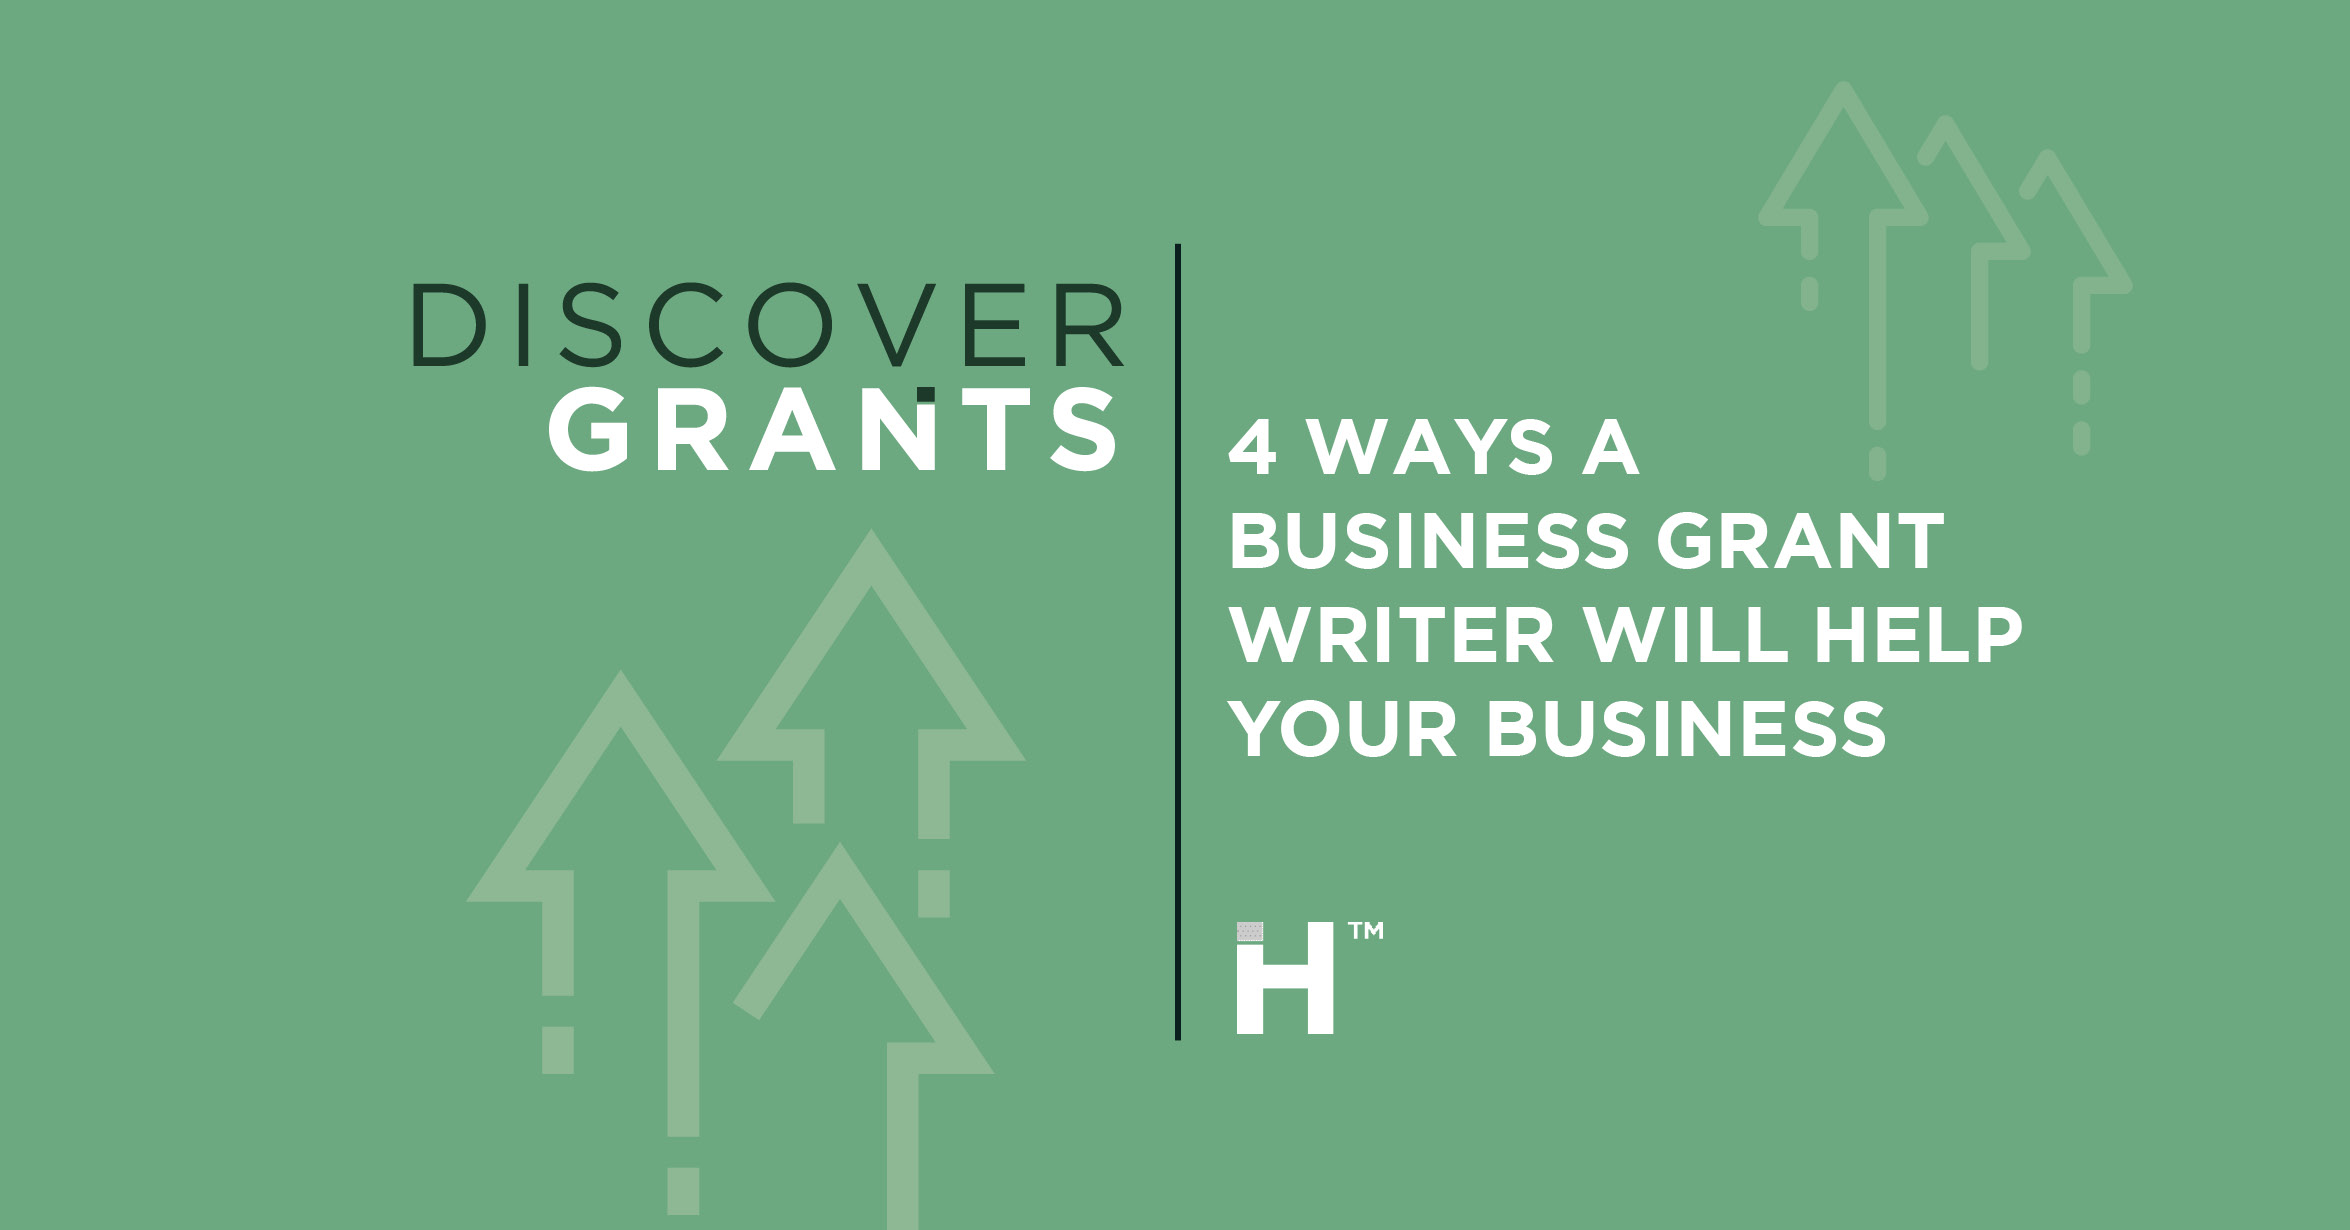 Why Work with a Business Grant Writer?